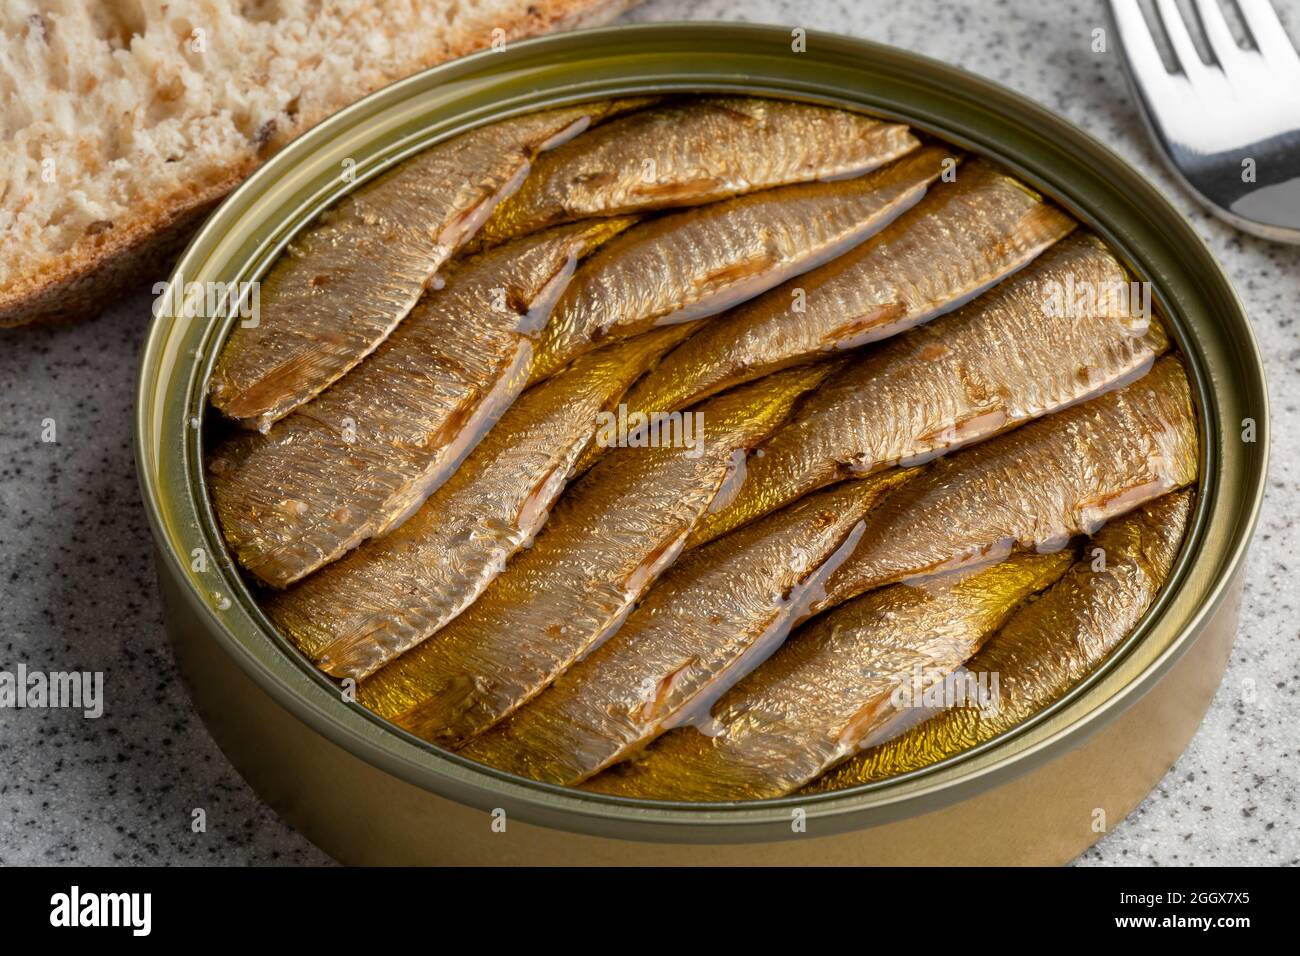 Canned smoked European sprat in oil for lunch close up Stock Photo